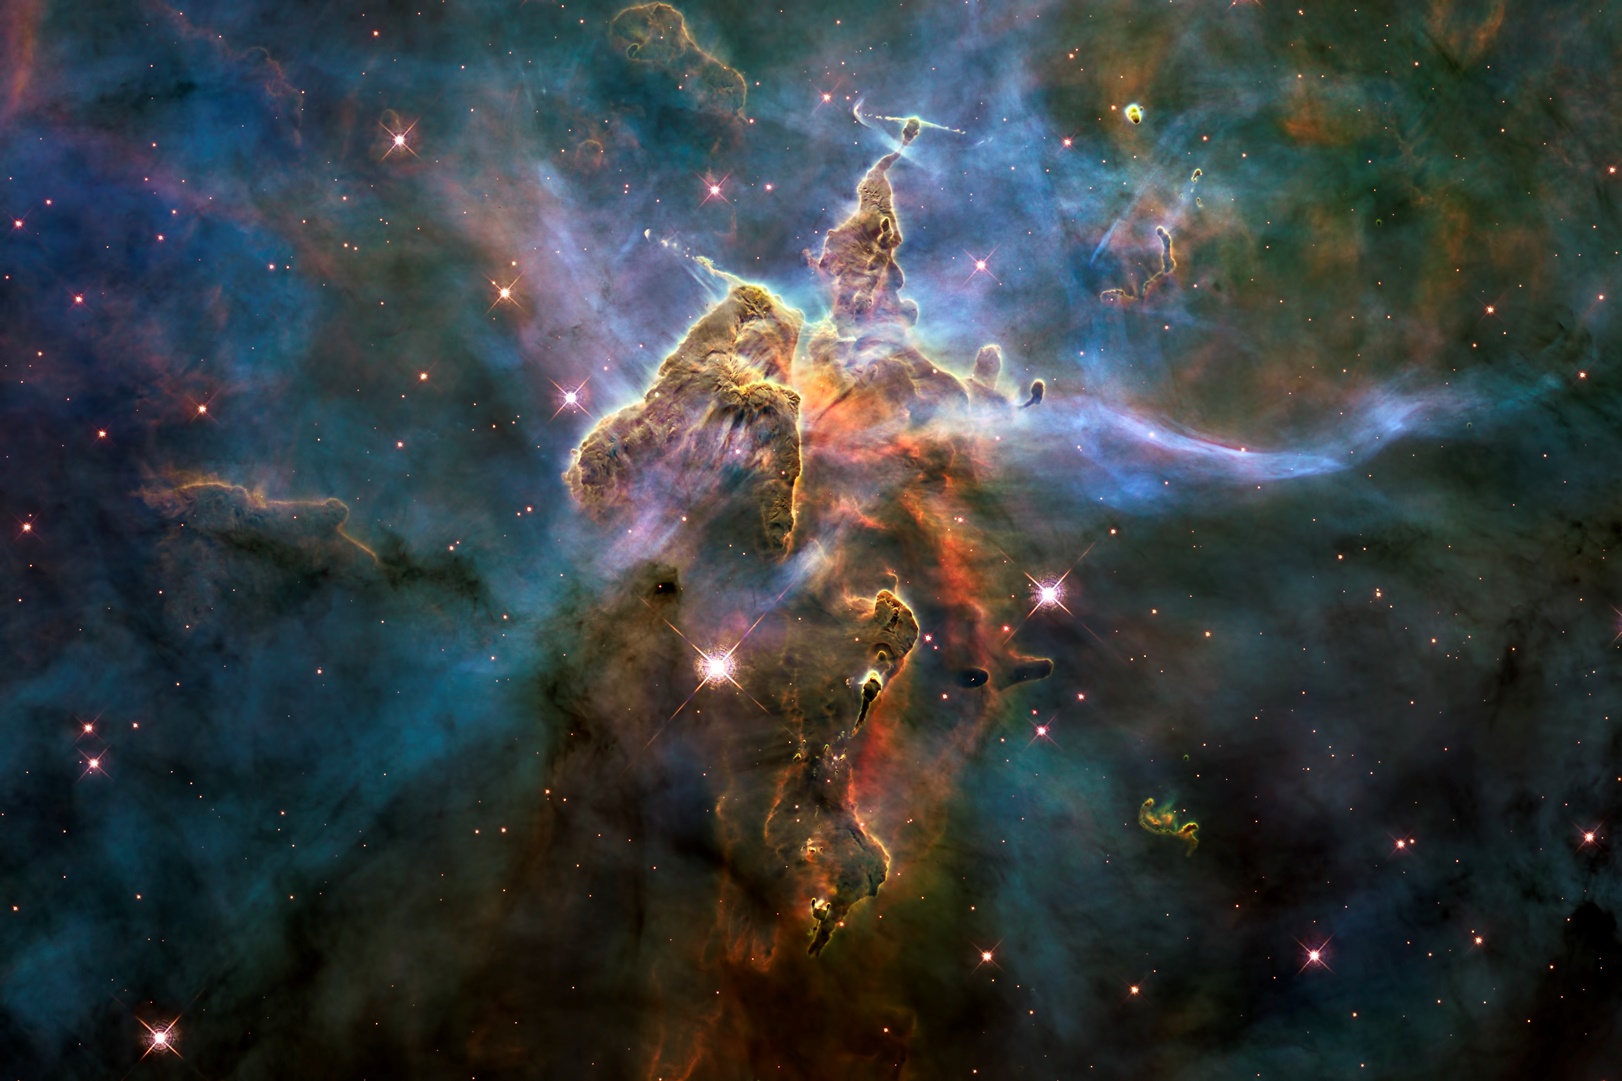 Mystic Mountain, a star-forming region in the Carina Nebula